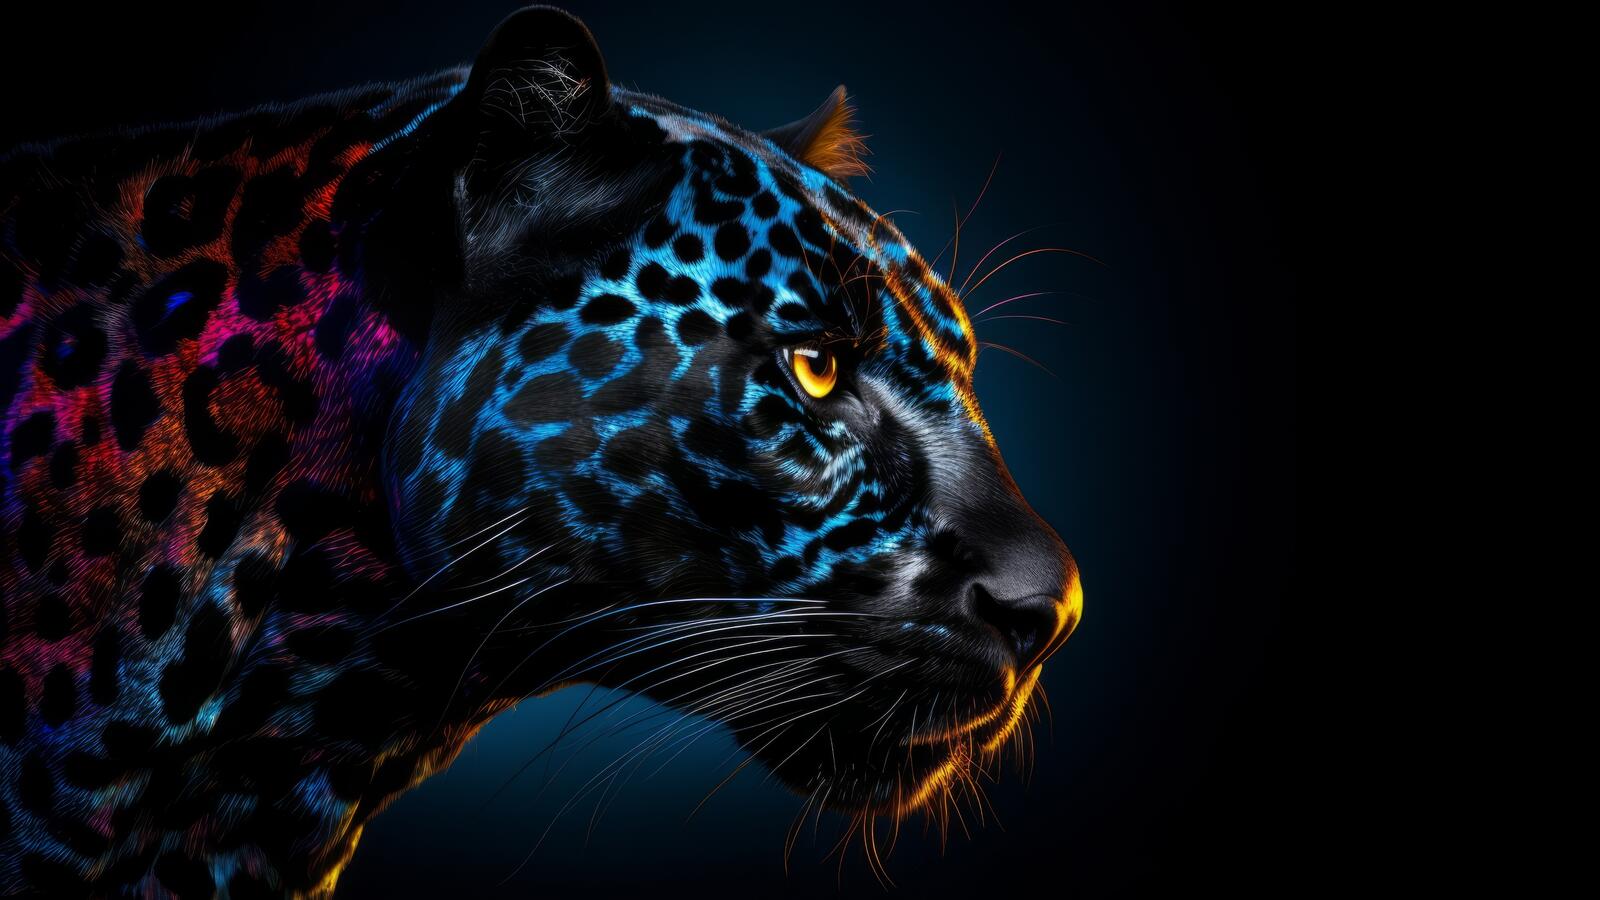 Free photo Black panther with rainbow pattern